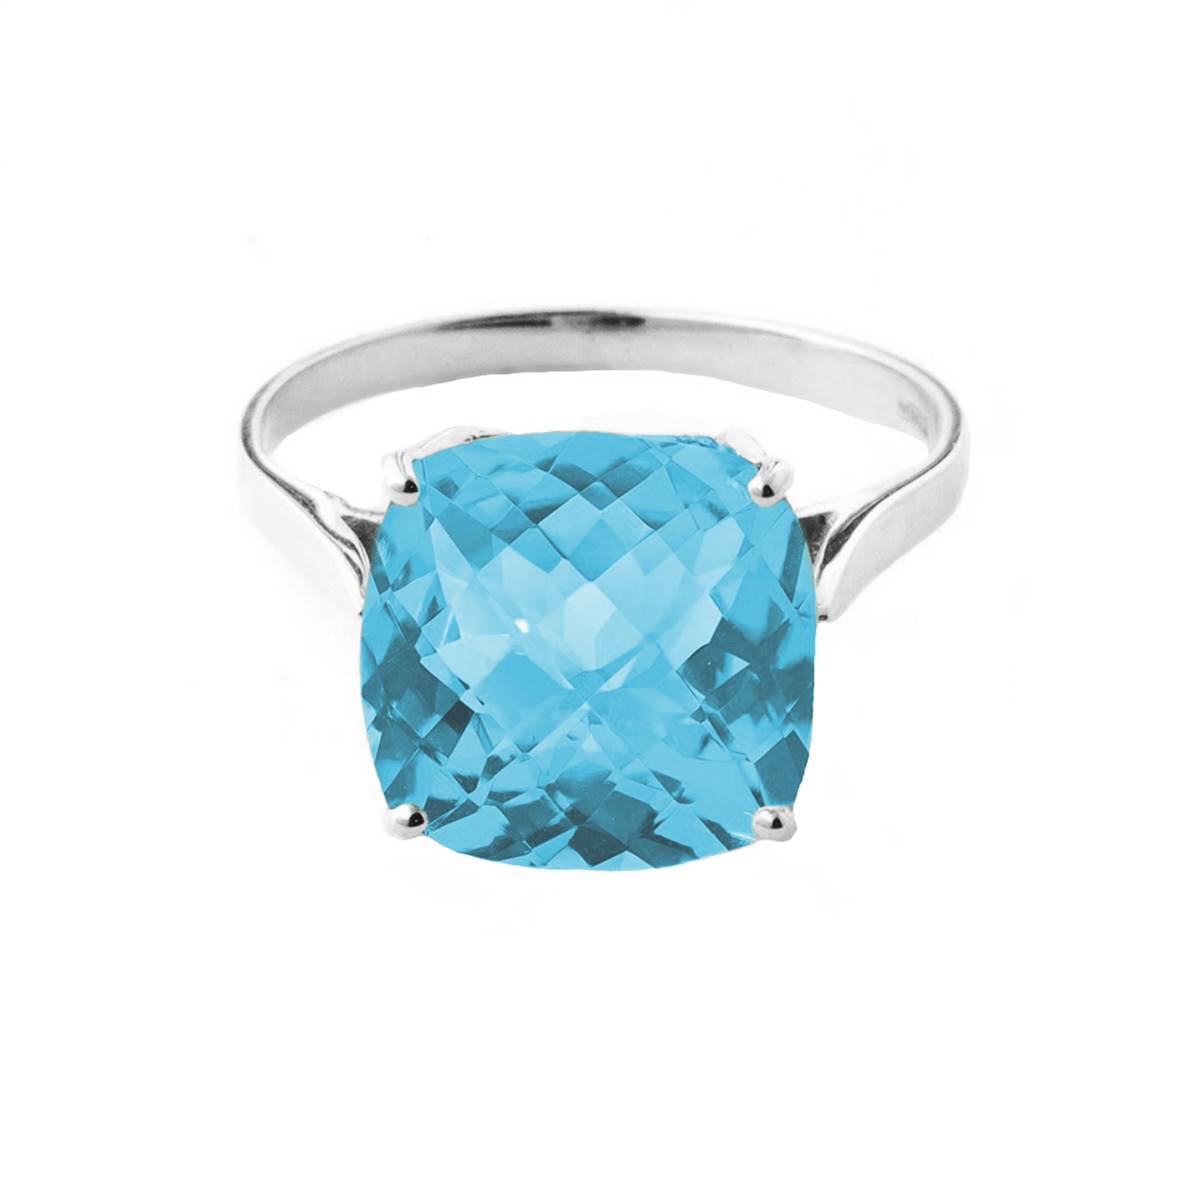 3.6 Carat 14K Solid White Gold Ring Natural Checkerboard Cut Blue Topaz